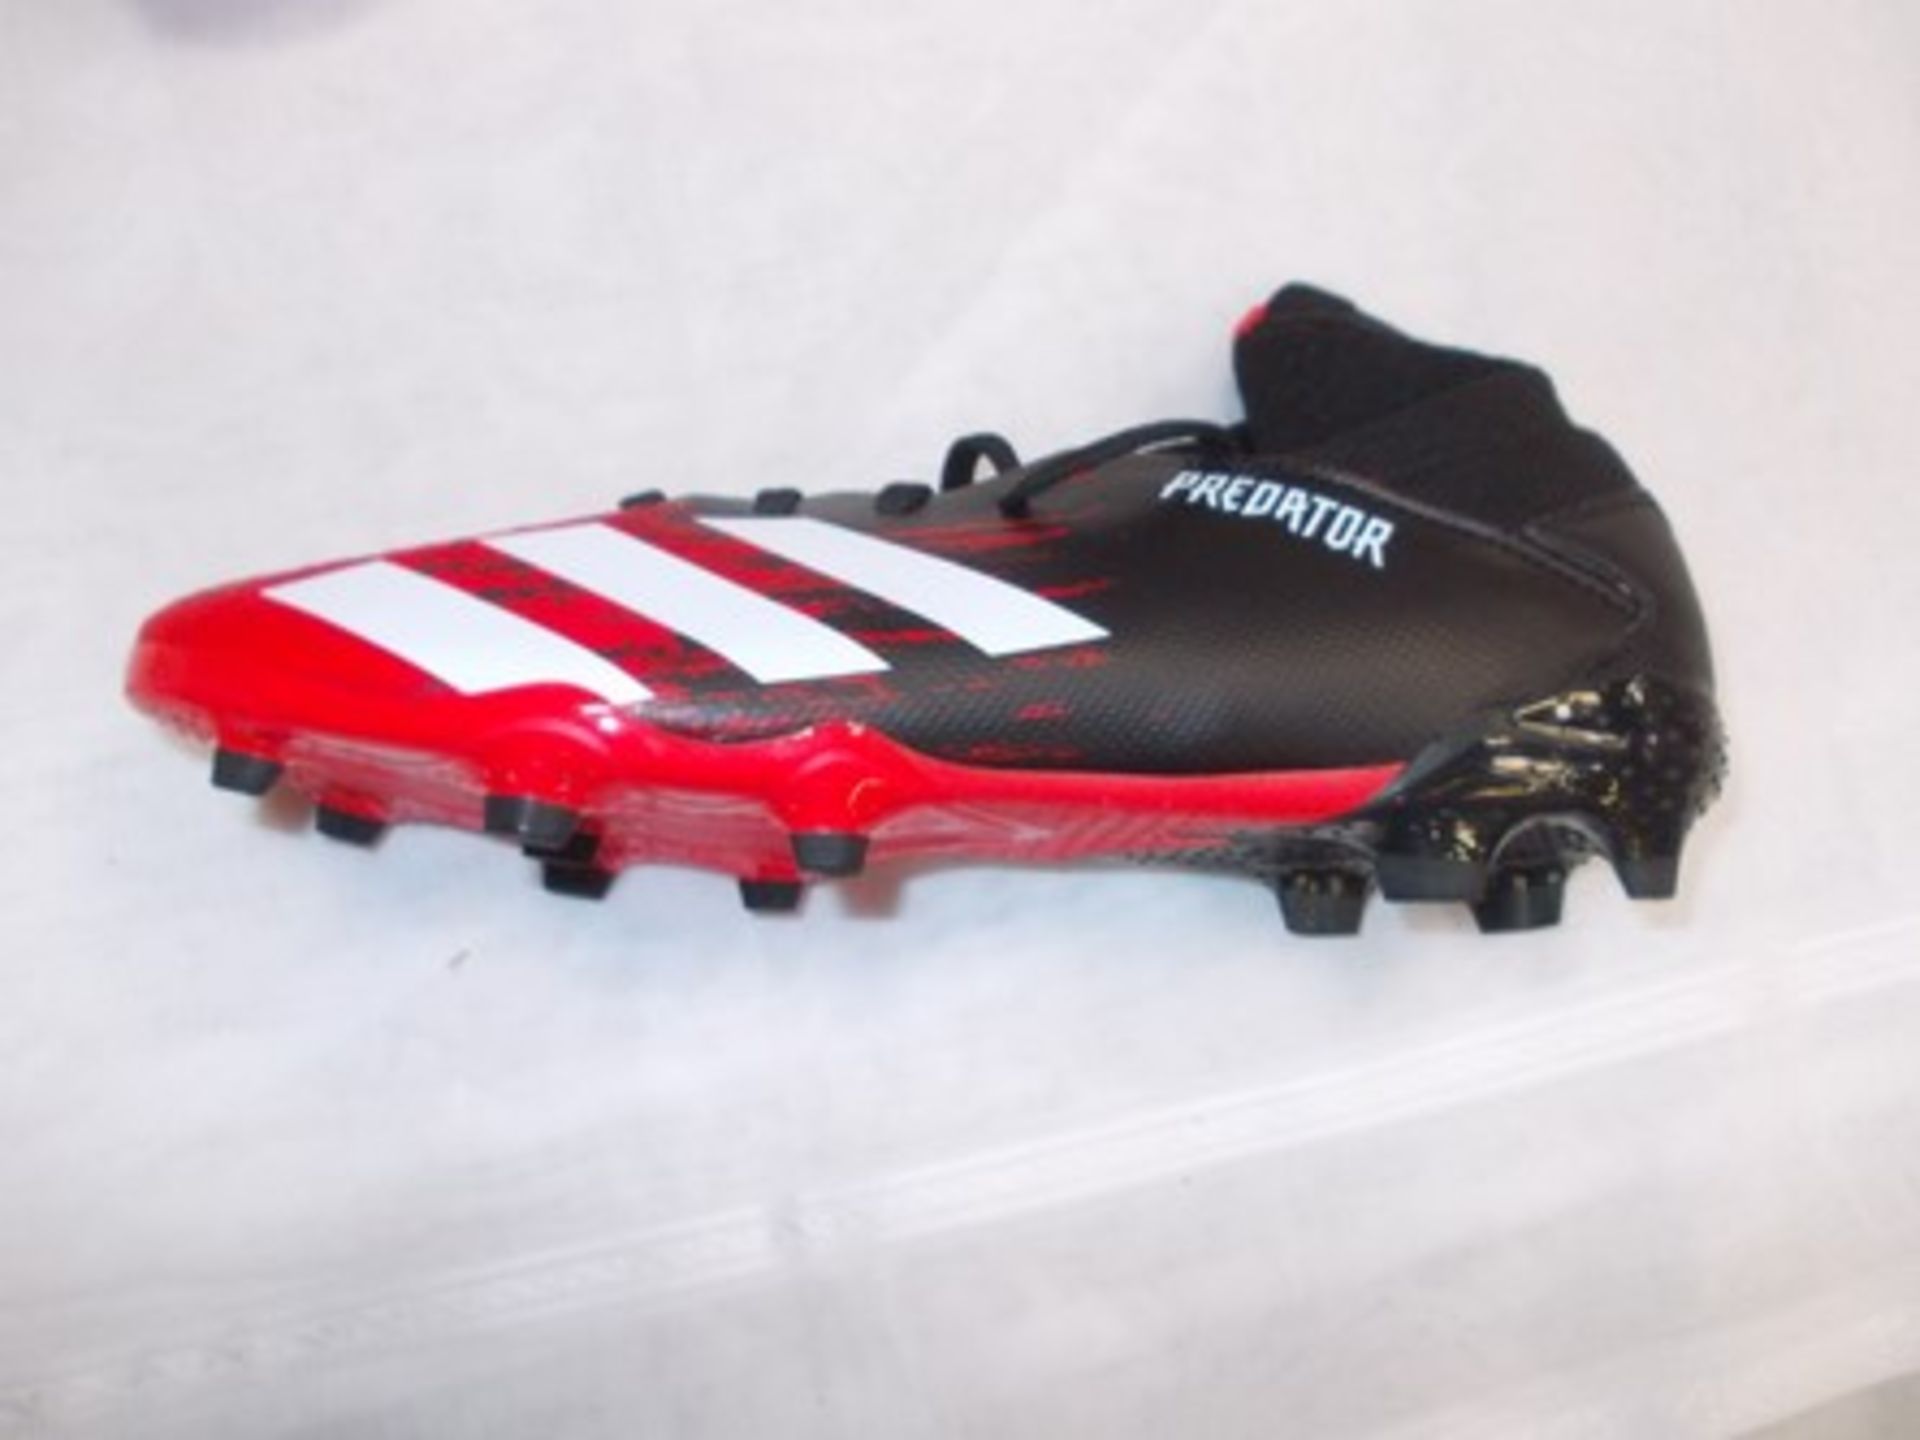 5 x pairs of Adidas Predator red/black football boots, style 20.3 FGJ, all UK size 5 - New in box ( - Image 2 of 2